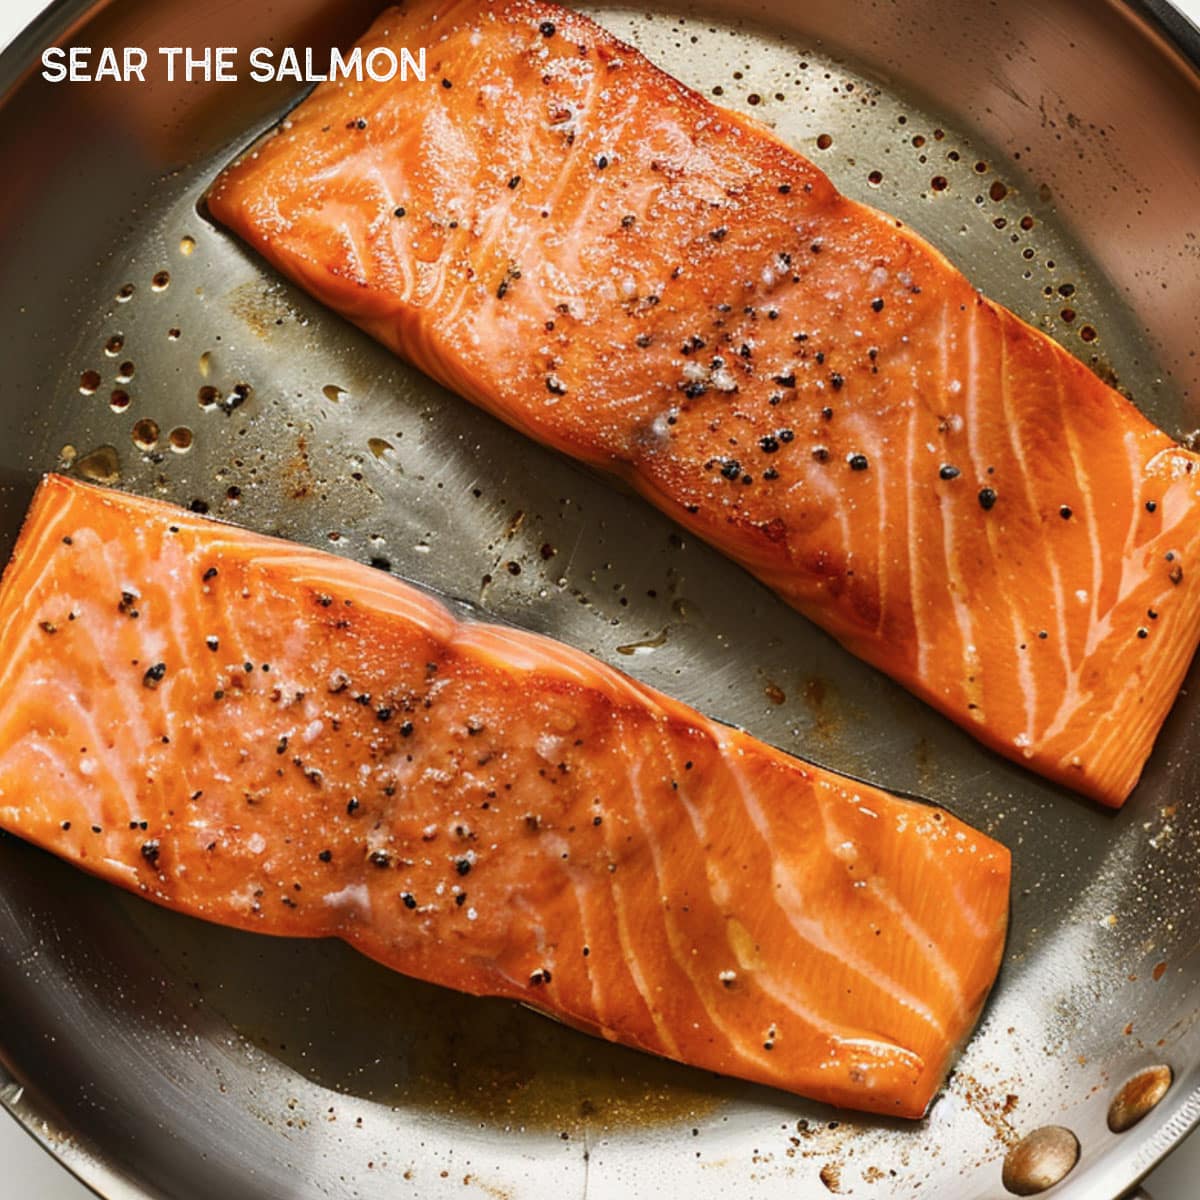 sear the salmon: place skin-side down in a hot, uncrowded pan and cook undisturbed until golden.